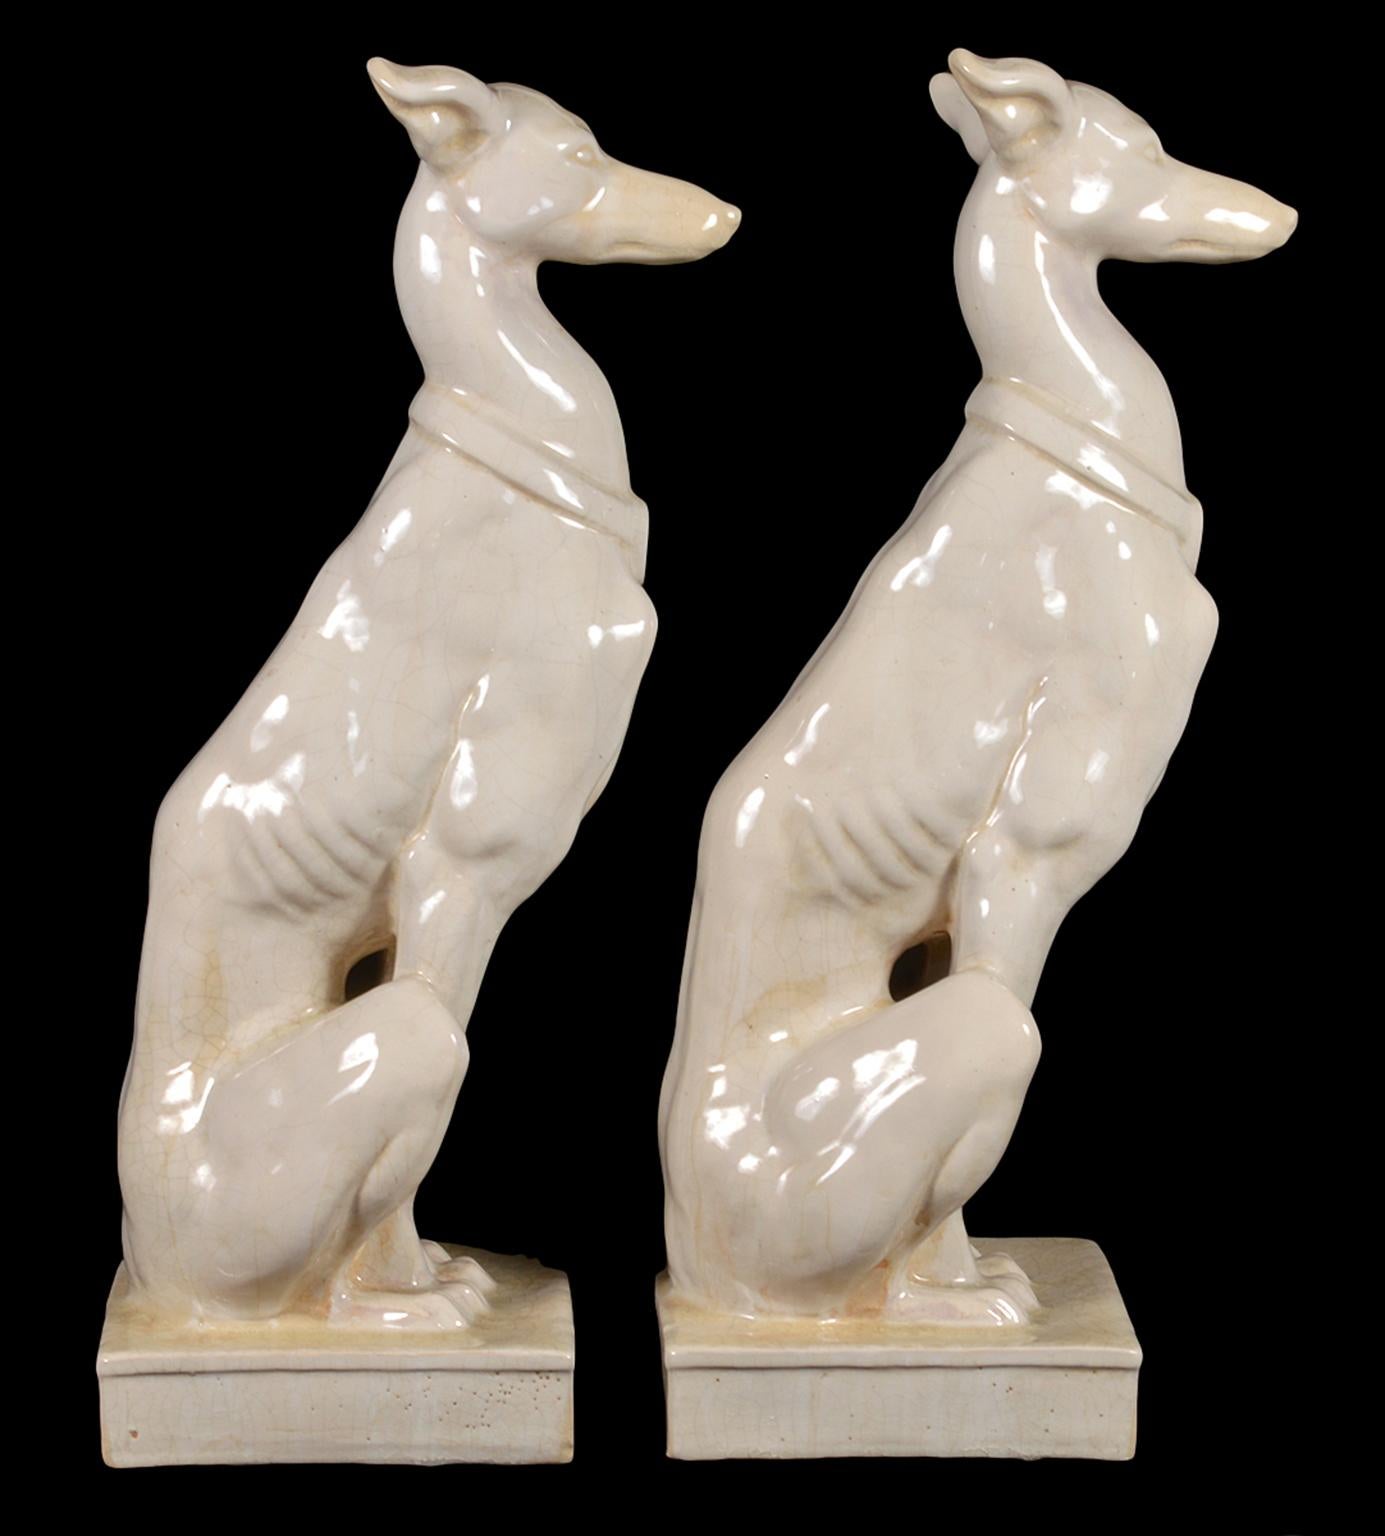 Pair of Vintage Italian Life Size Glazed Terracotta Grayhound Dogs or Whippets 1